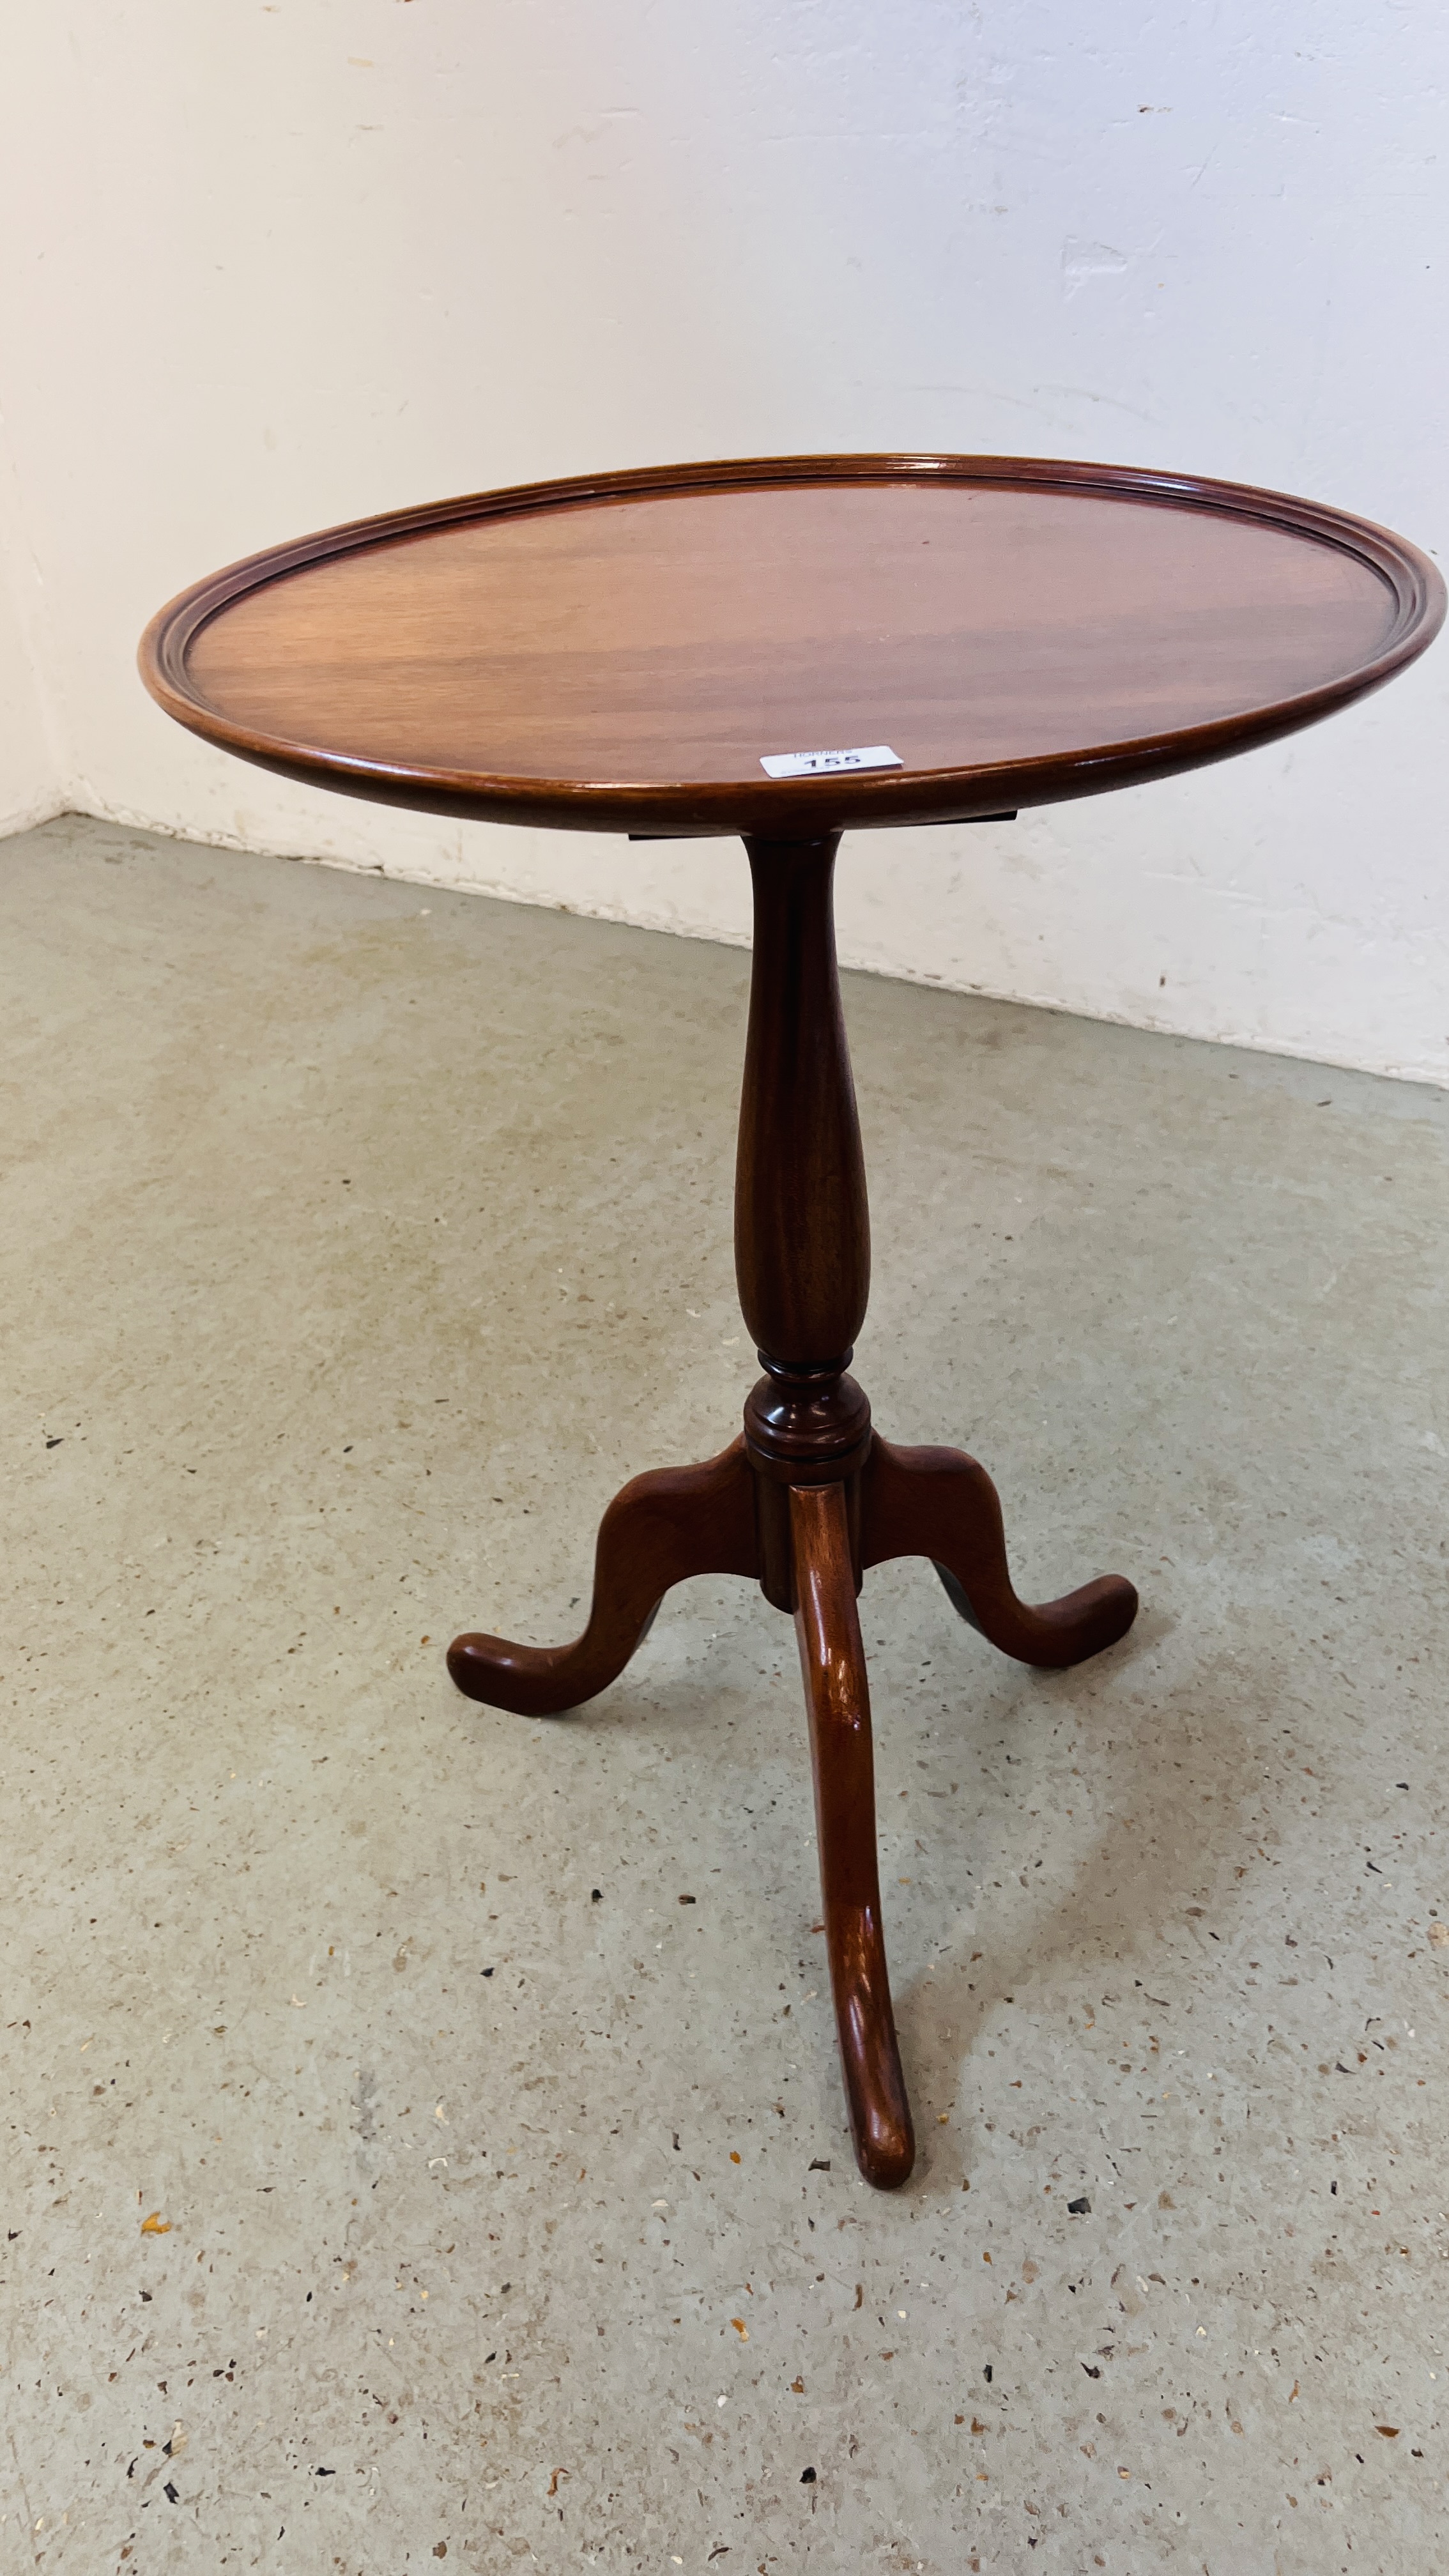 TWO GOOD QUALITY REPRODUCTION MAHOGANY PEDESTAL WINE TABLES, ONE WITH RIVEN COLUMN DETAIL. - Image 2 of 8